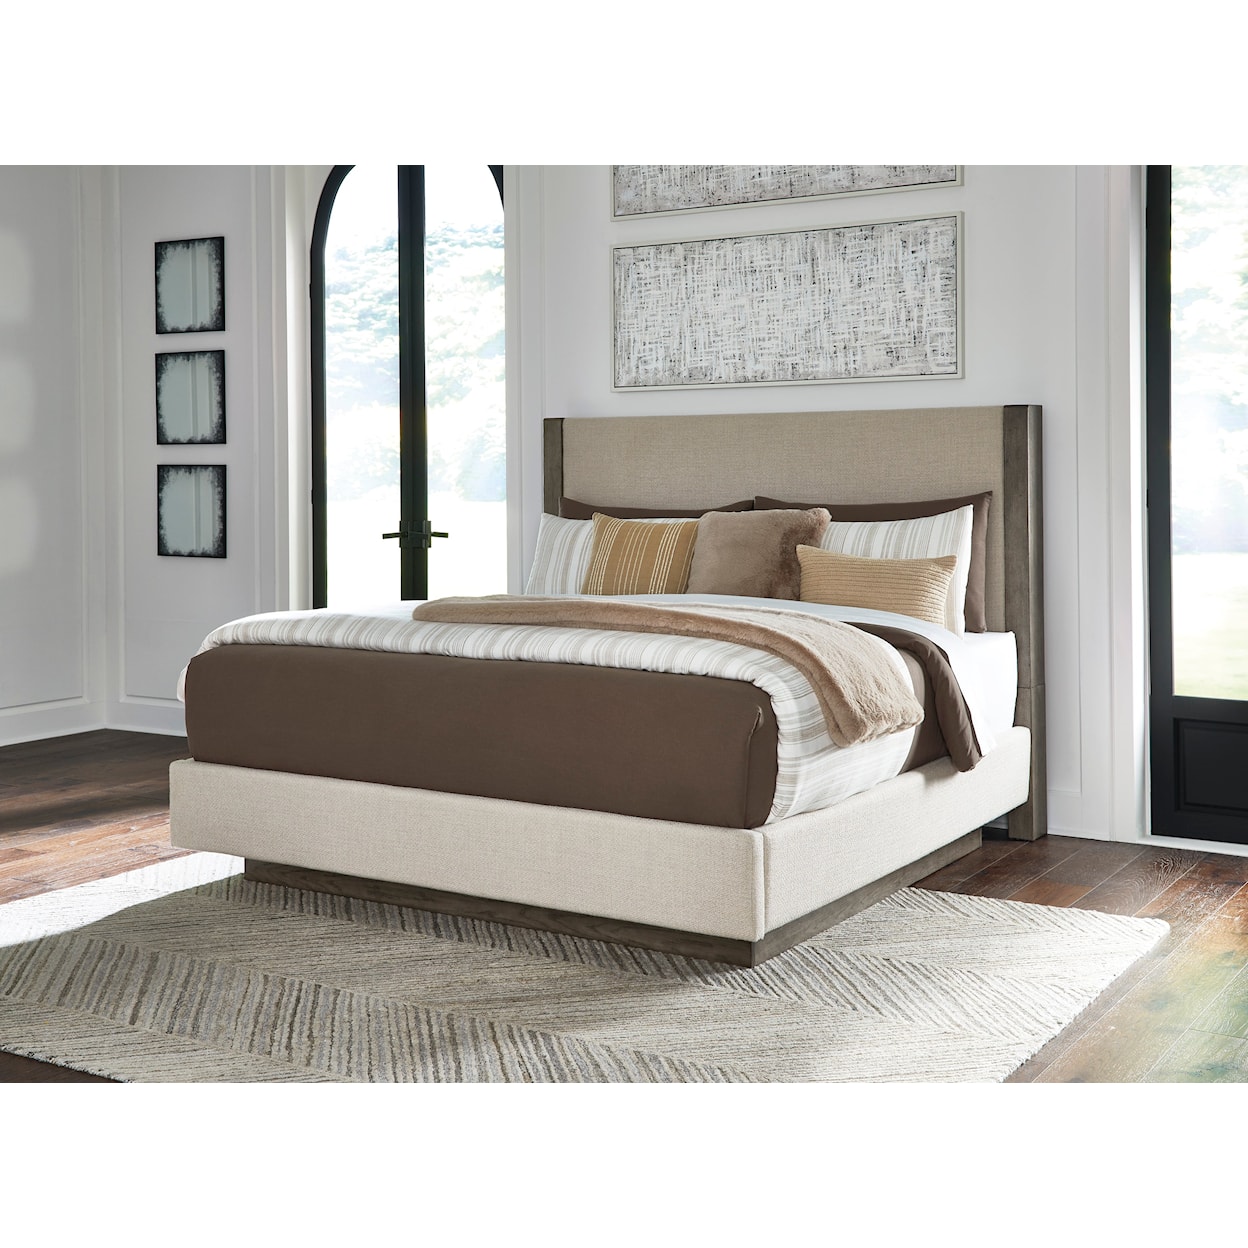 Benchcraft by Ashley Anibecca California King Upholstered Bed